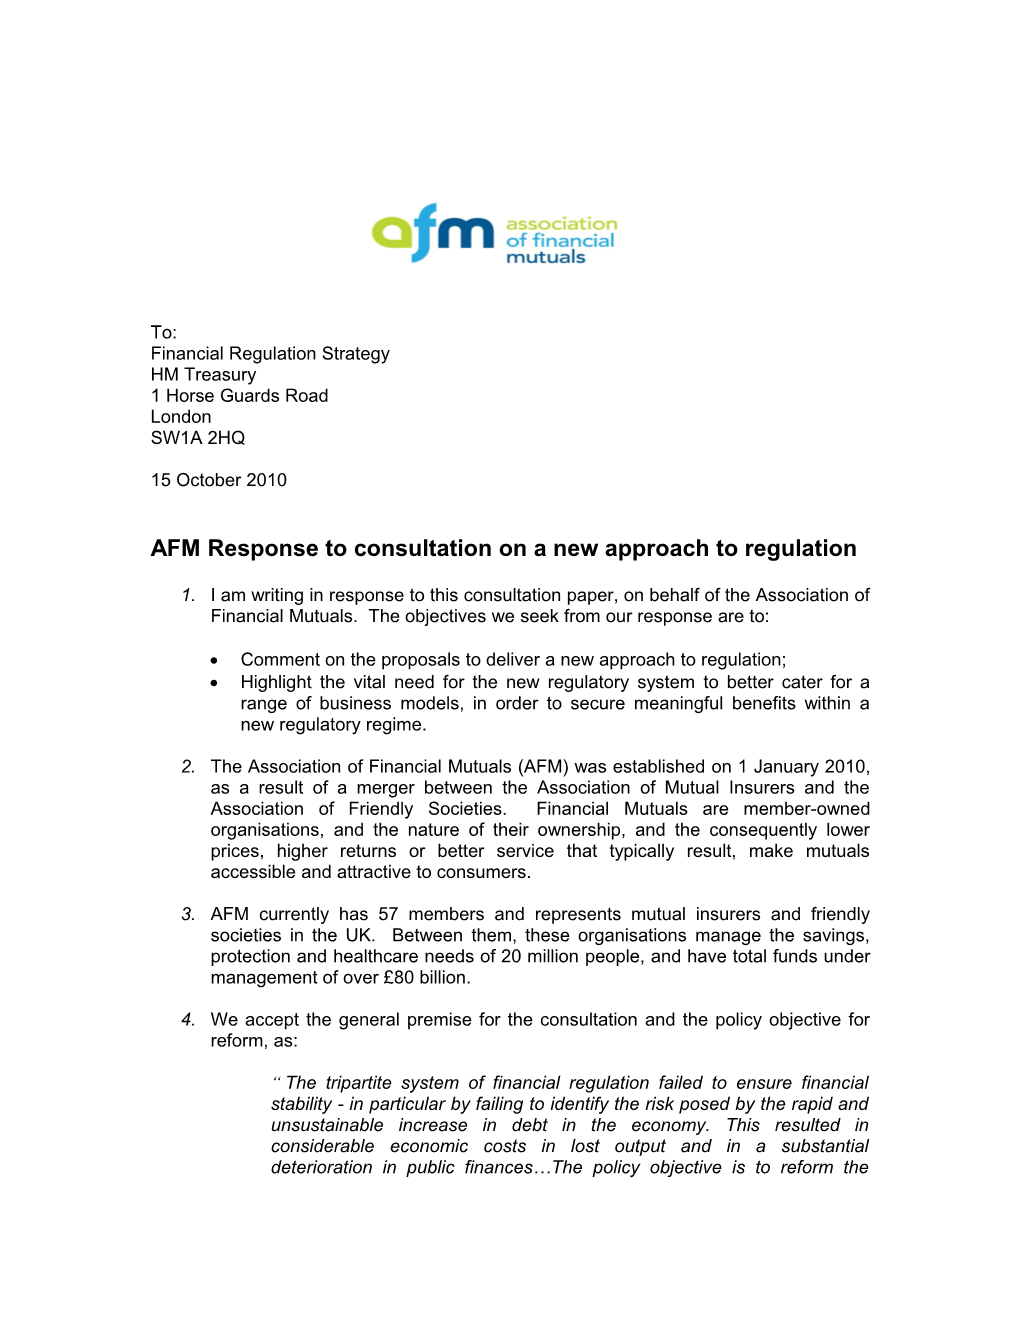 AFM Response to Consultation on a New Approach to Regulation